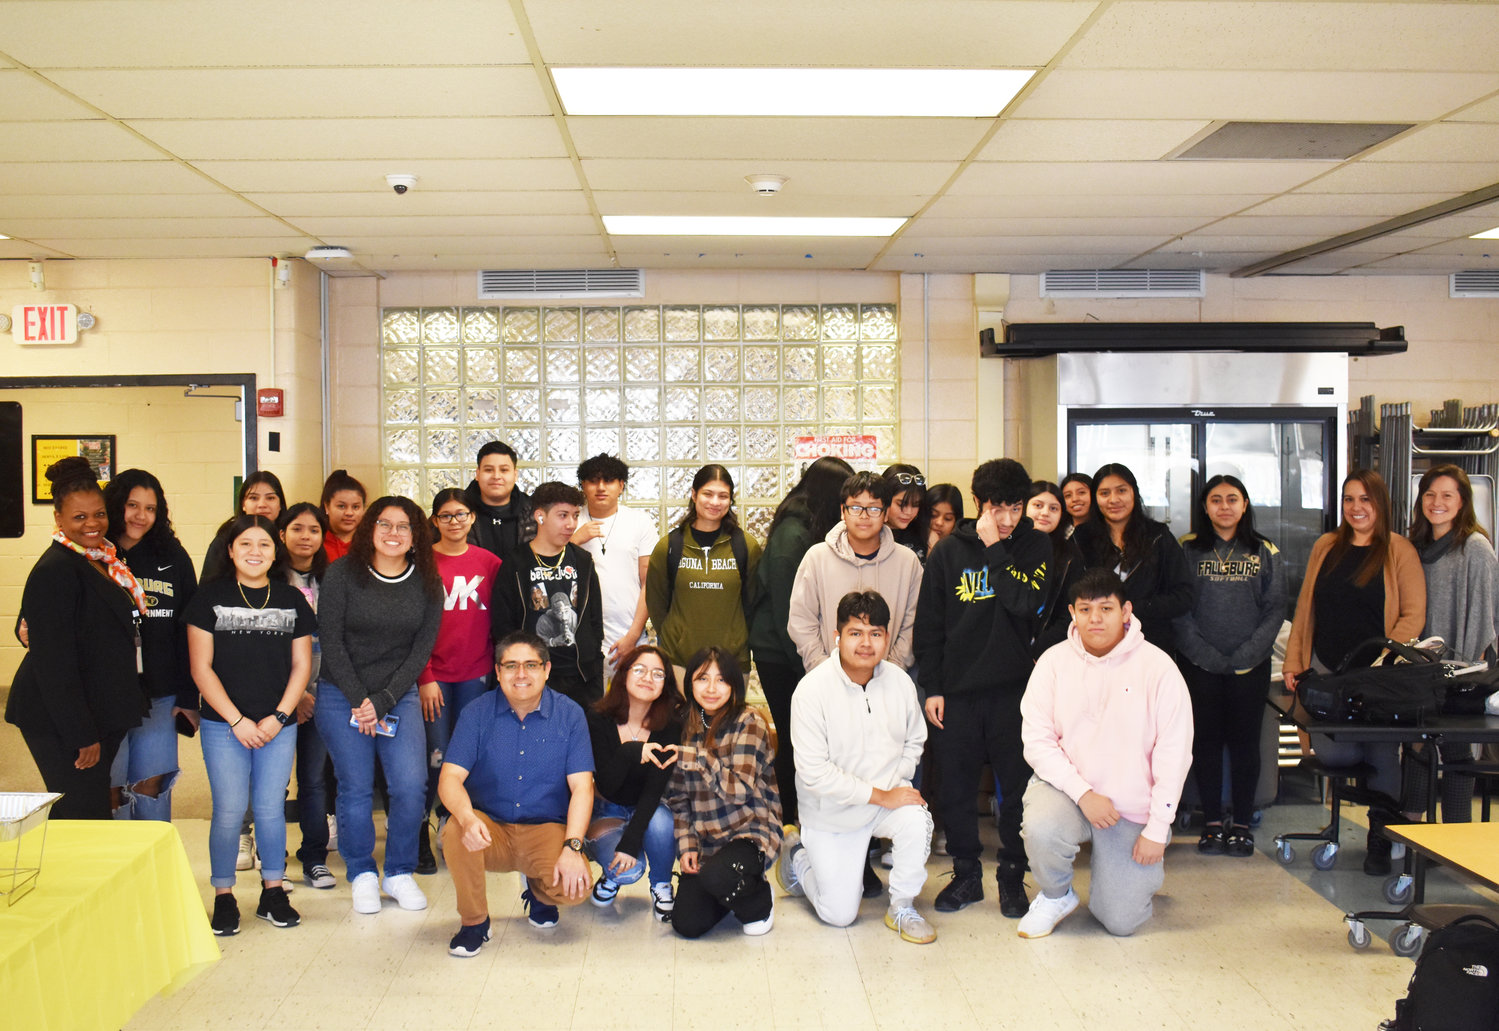 Group photo with English language learner students and teachers.